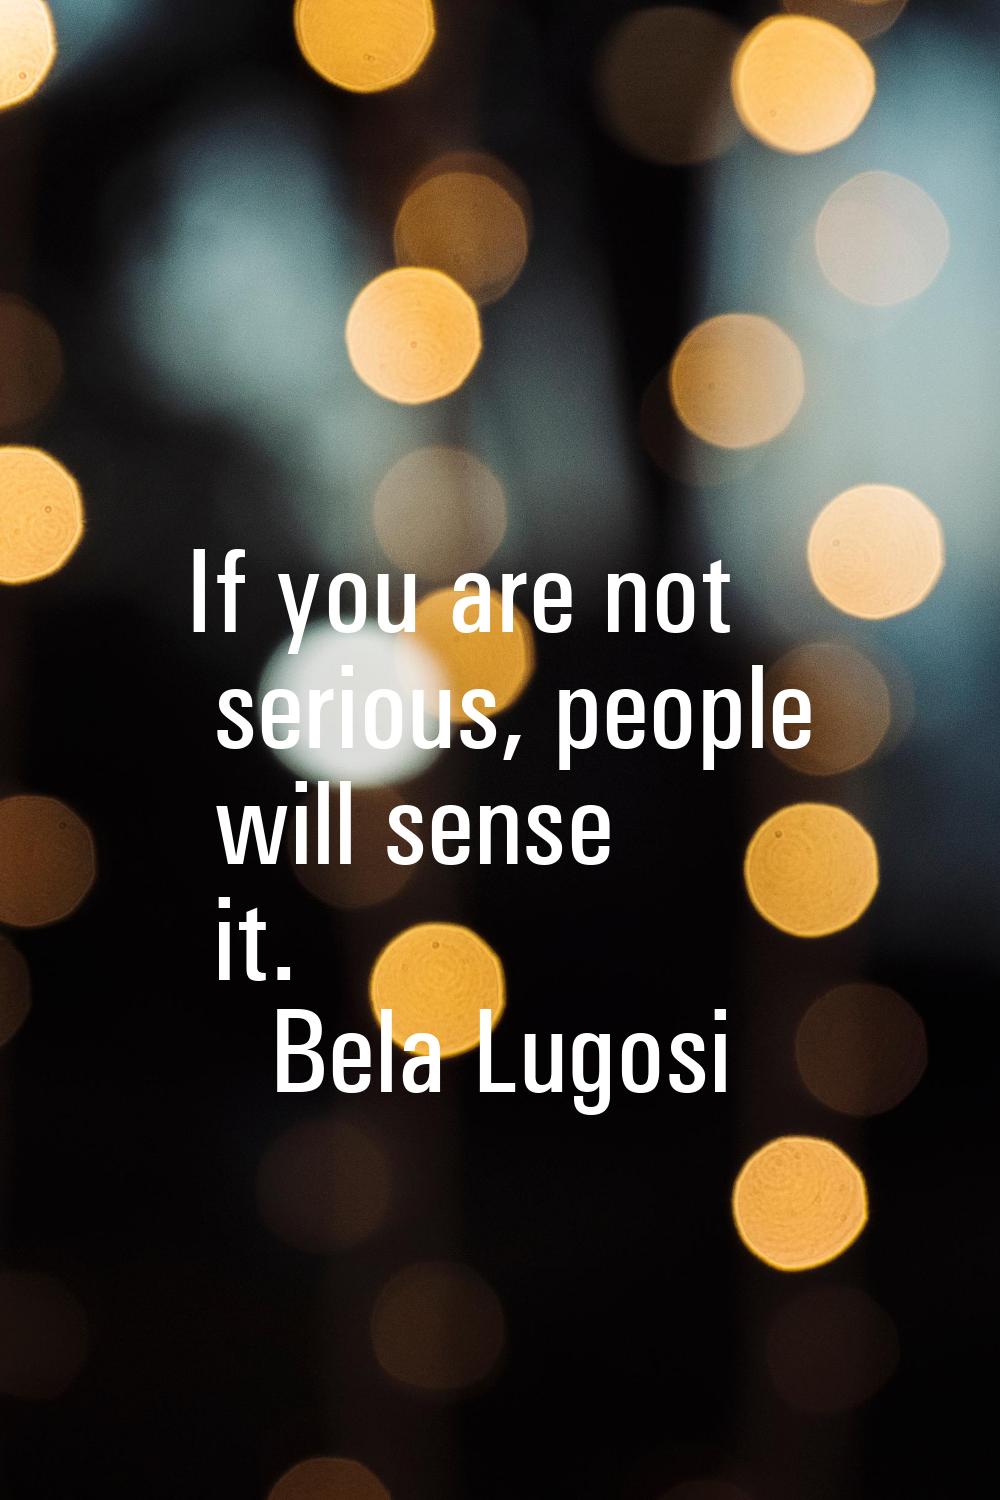 If you are not serious, people will sense it.